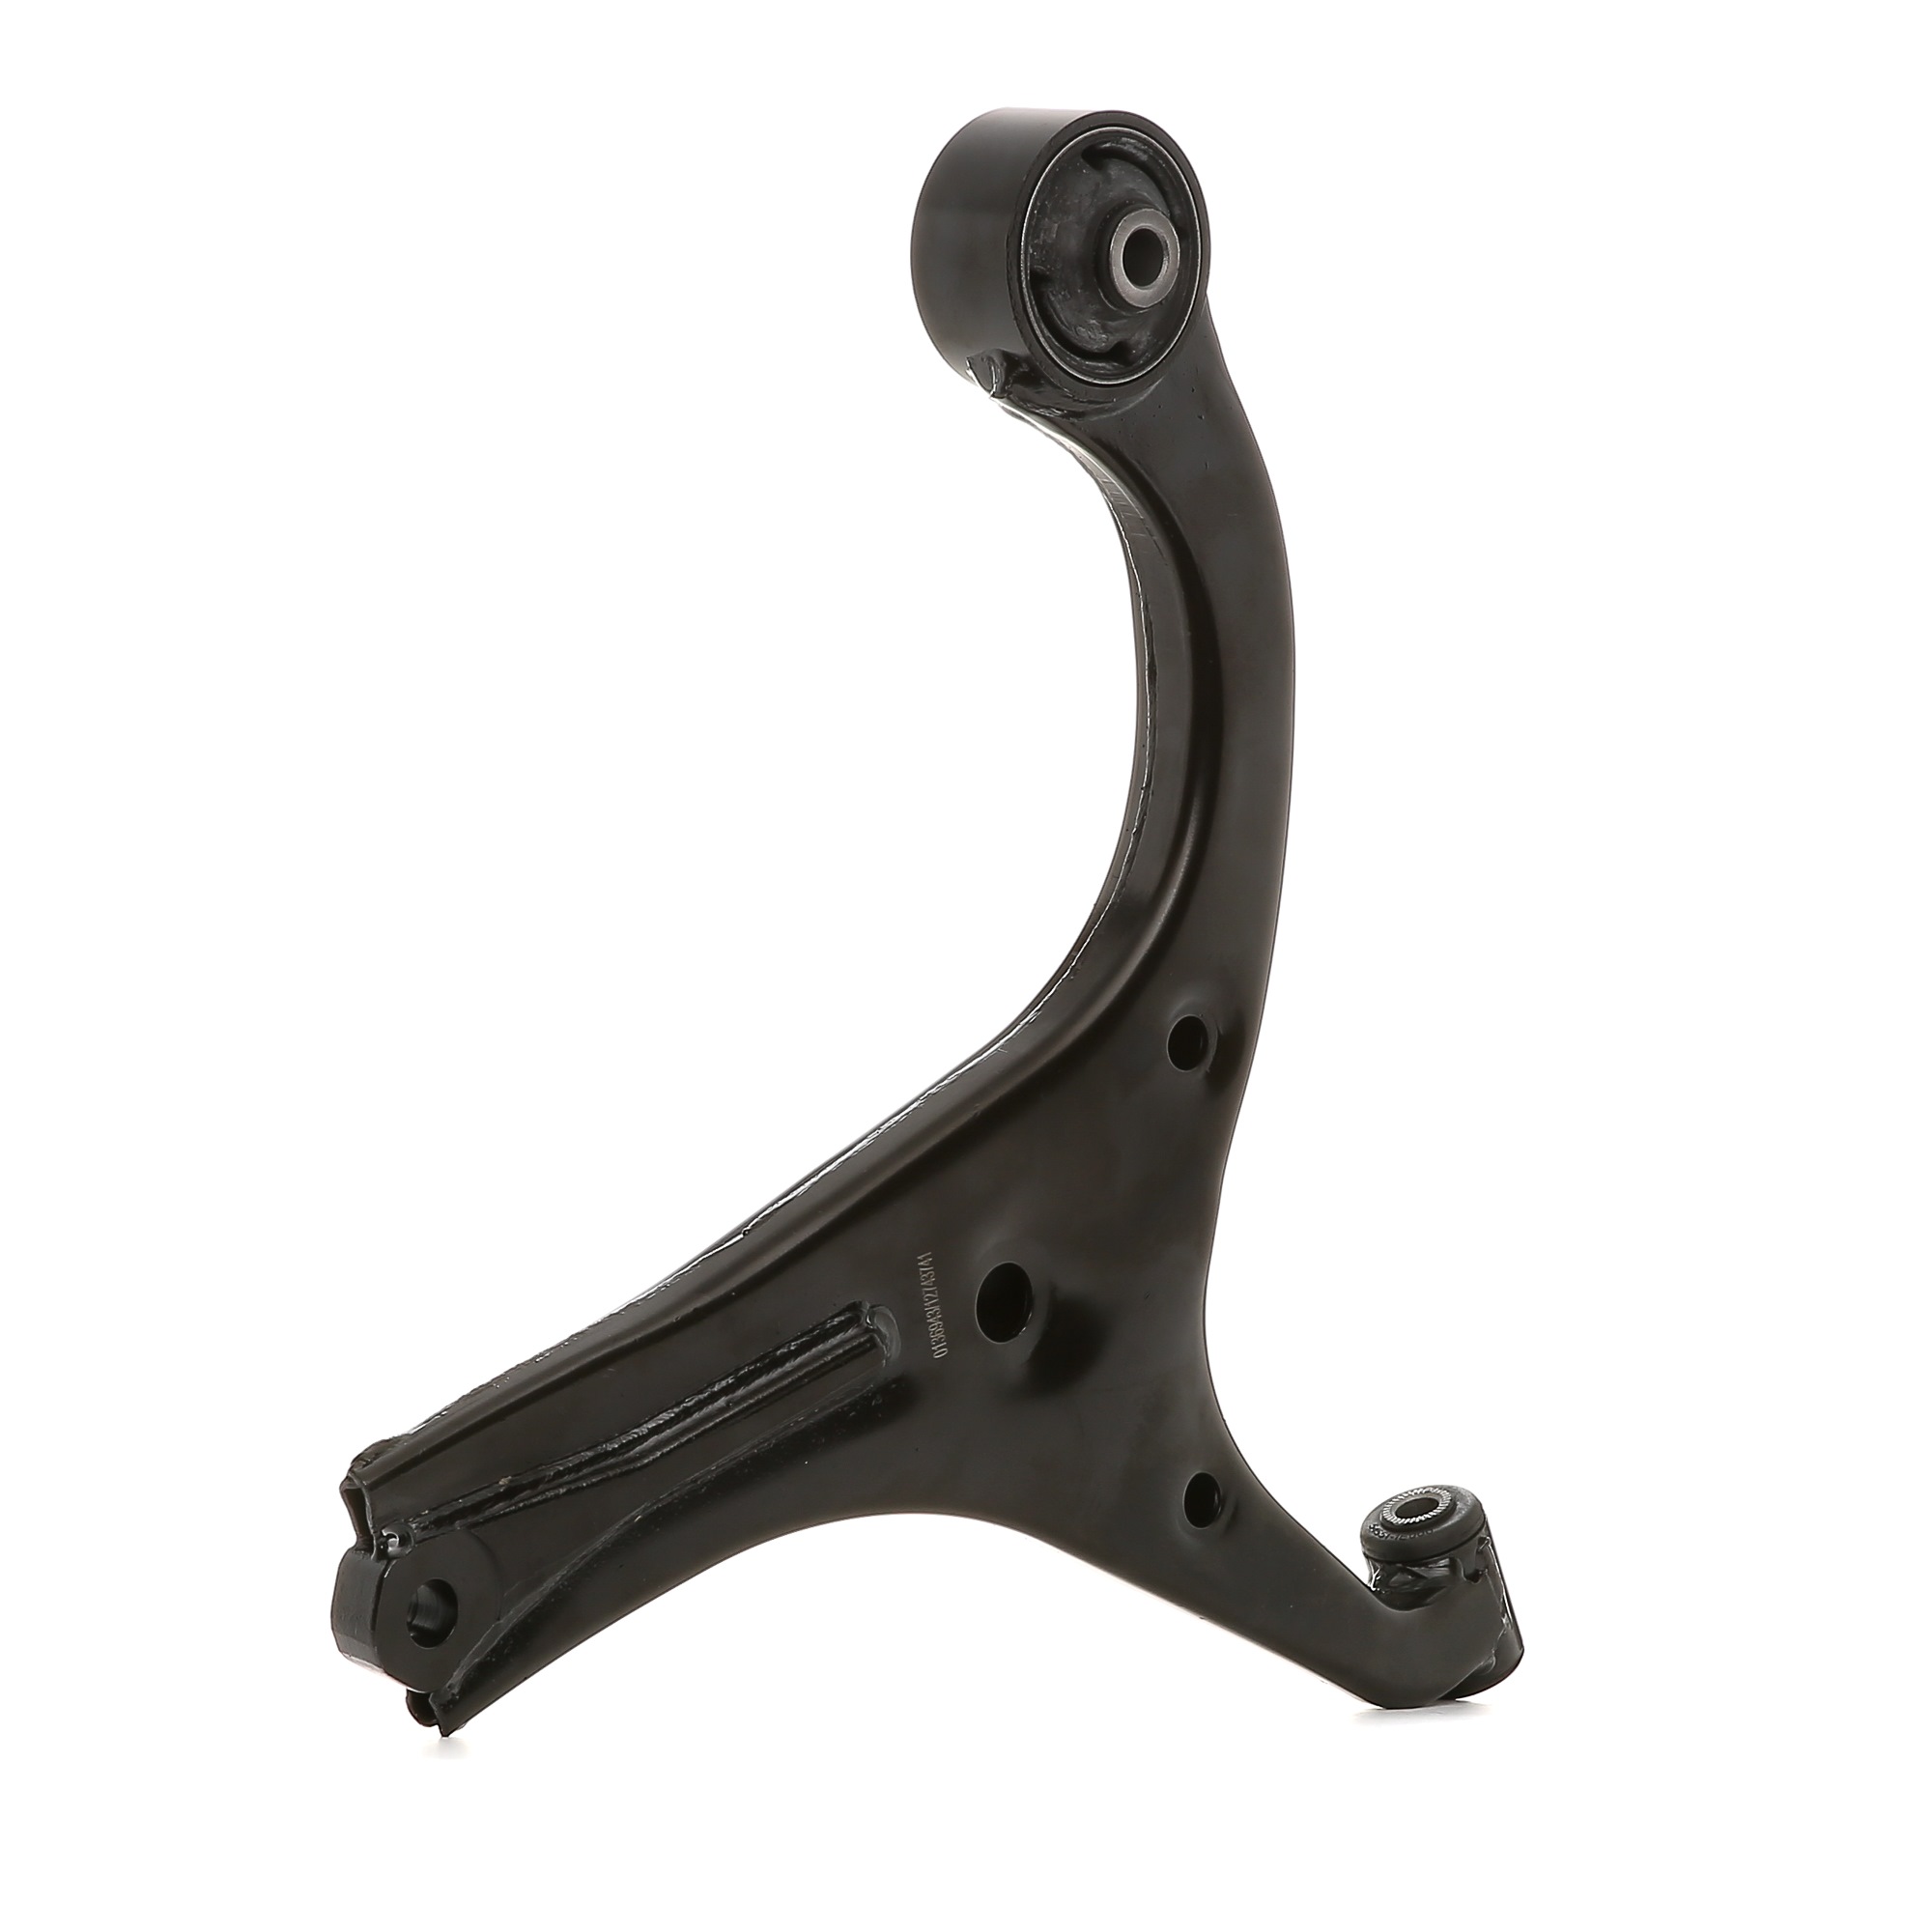 SKCA-0050900 STARK Control arm KIA without ball joint, Front Axle Left, Control Arm, Sheet Steel, Cone Size: 15,0 mm